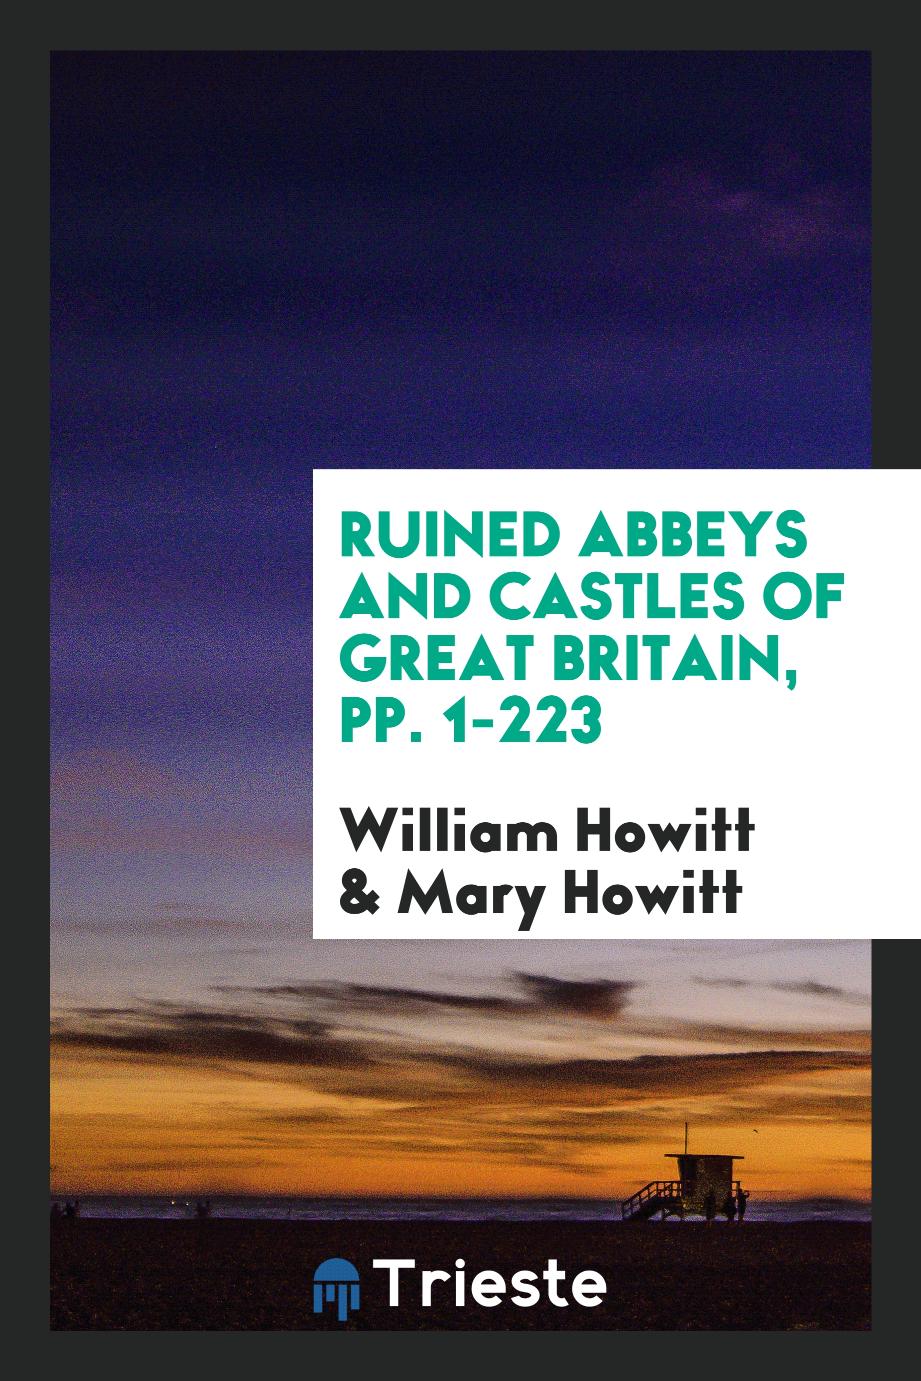 Ruined Abbeys and Castles of Great Britain, pp. 1-223